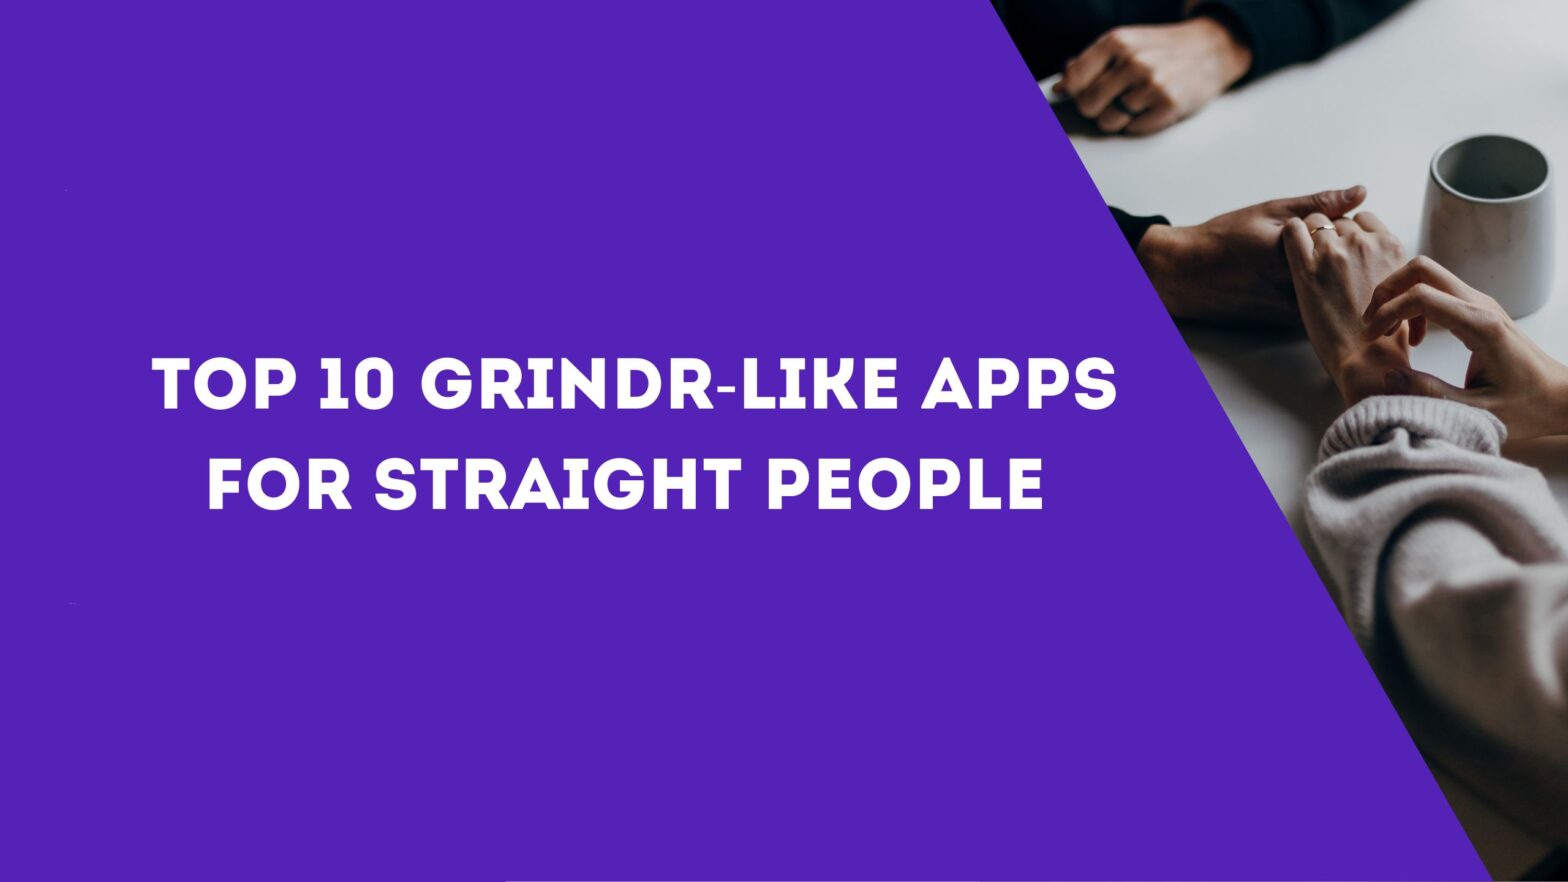 Top 10 Grindr-Like Apps for Straight People